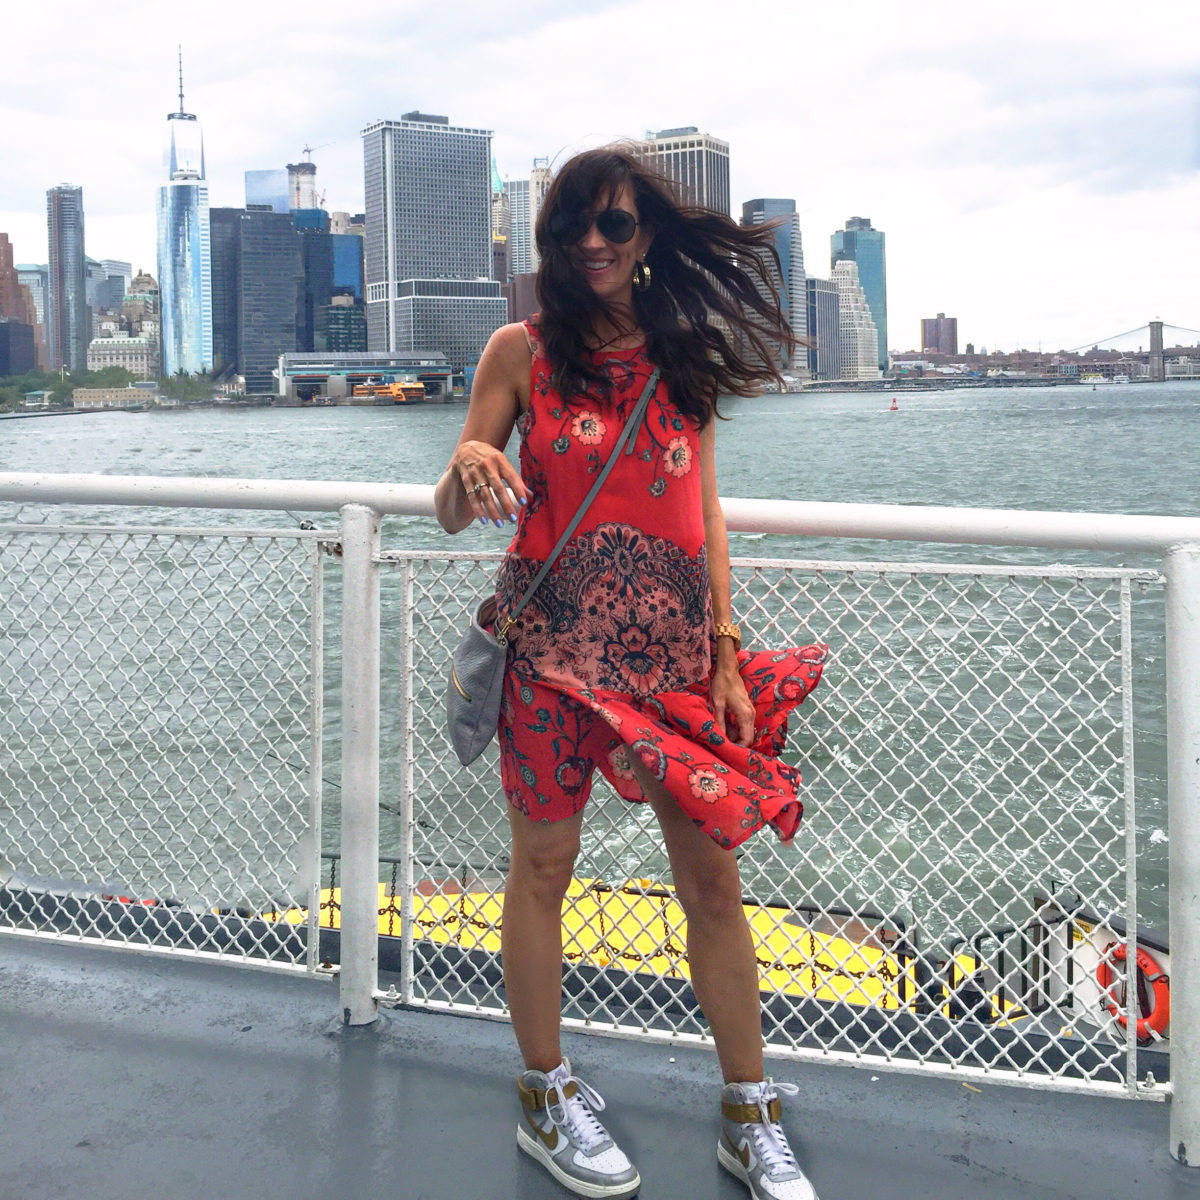 nyc_summer_travel_style_governors_island_ferry